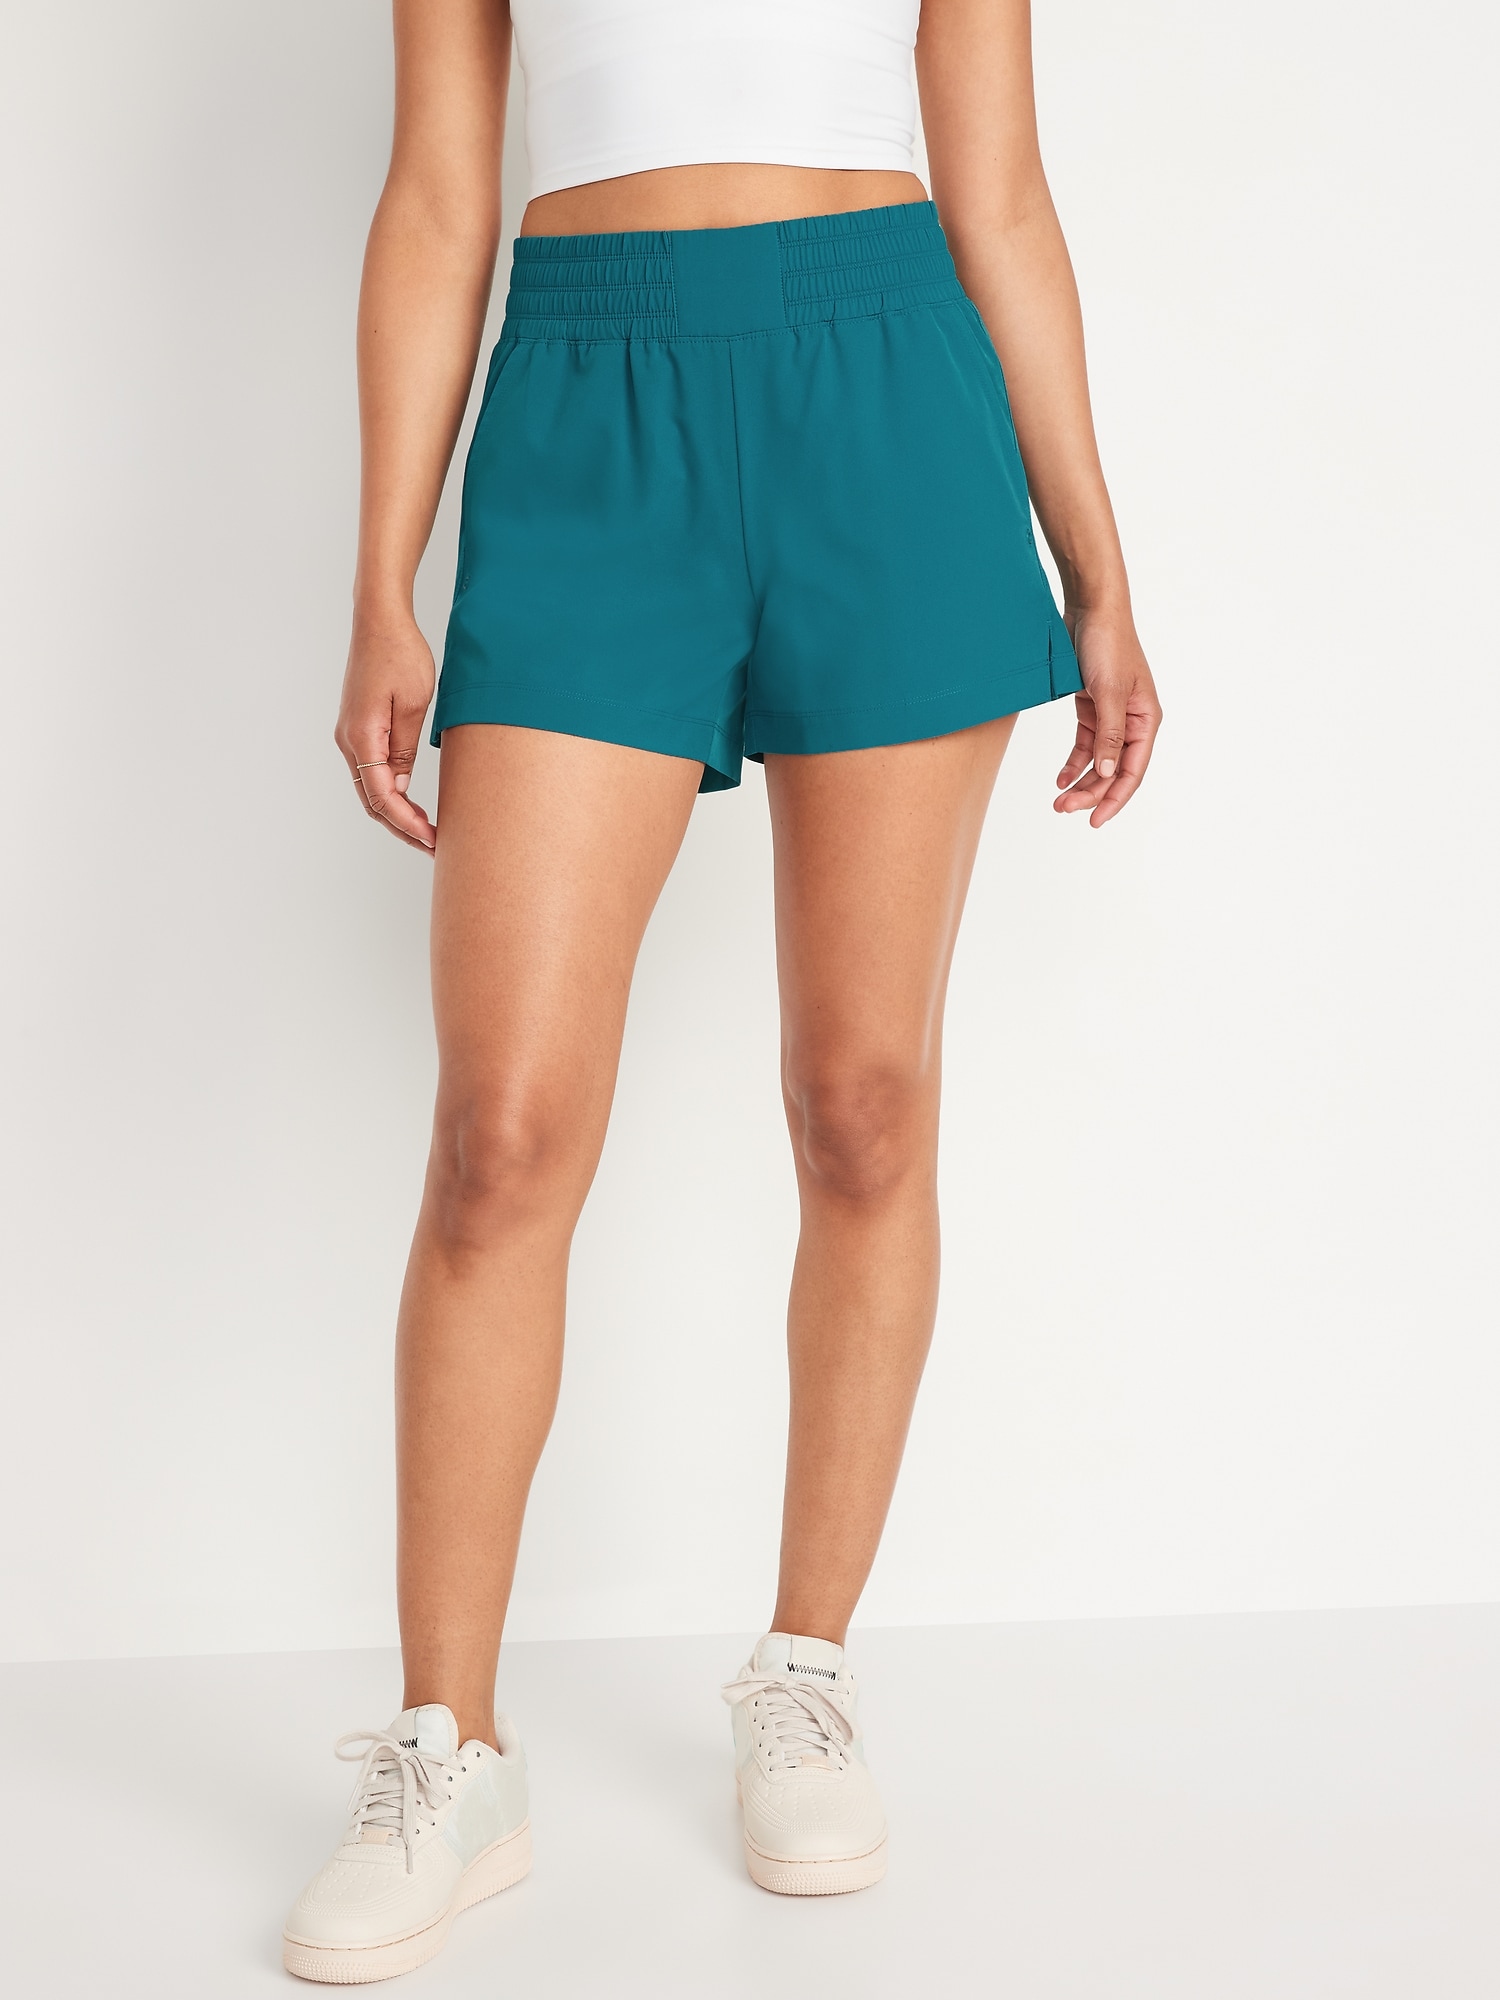 Old Navy - High-Waisted StretchTech Zip-Pocket Performance Shorts